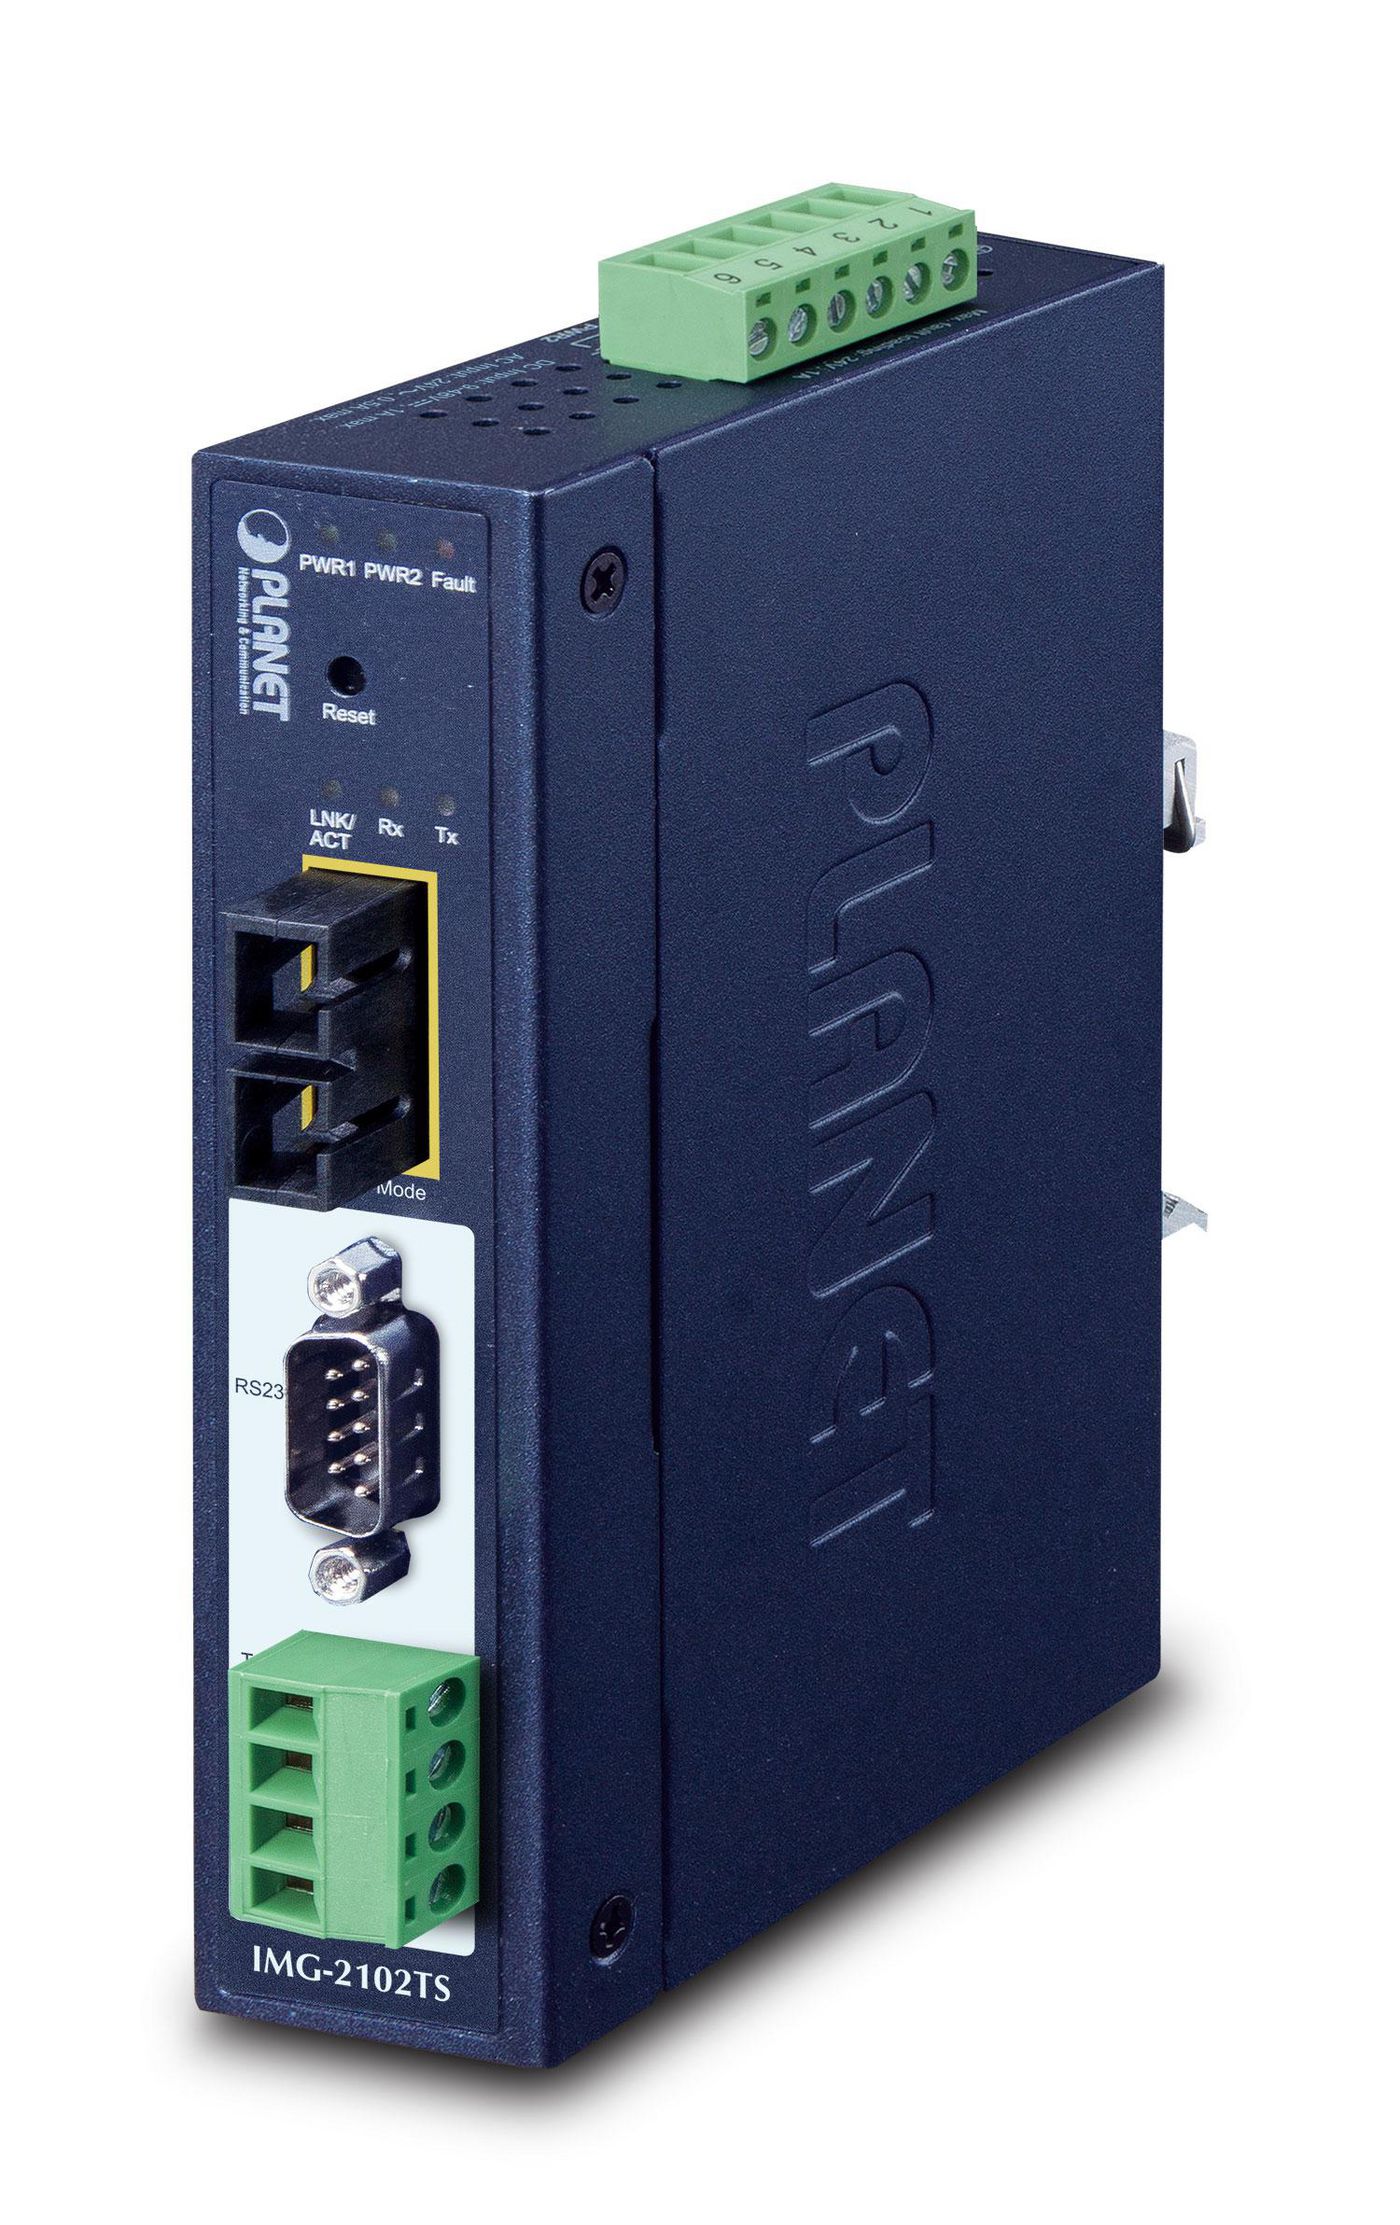 Planet IMG-2102TS W125855892 IP30 Industrial 1-Port 